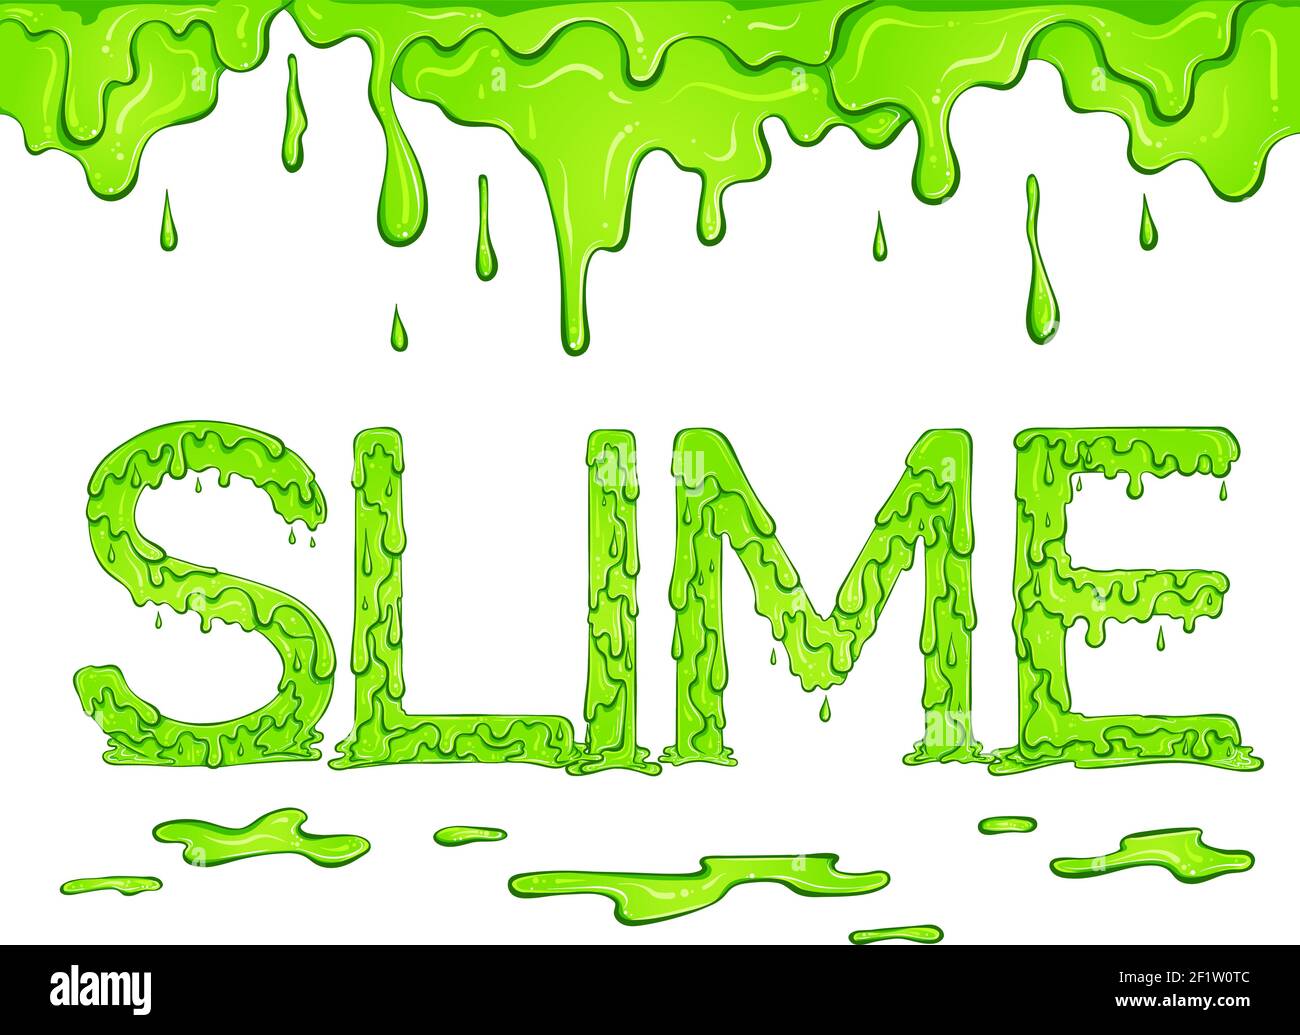 Lettering dripping word Slime green color with drips. Vector illustration isolated on white background. Font design in hand drawn style. Words for print, banners, posters, books, icon, stickers. Stock Vector